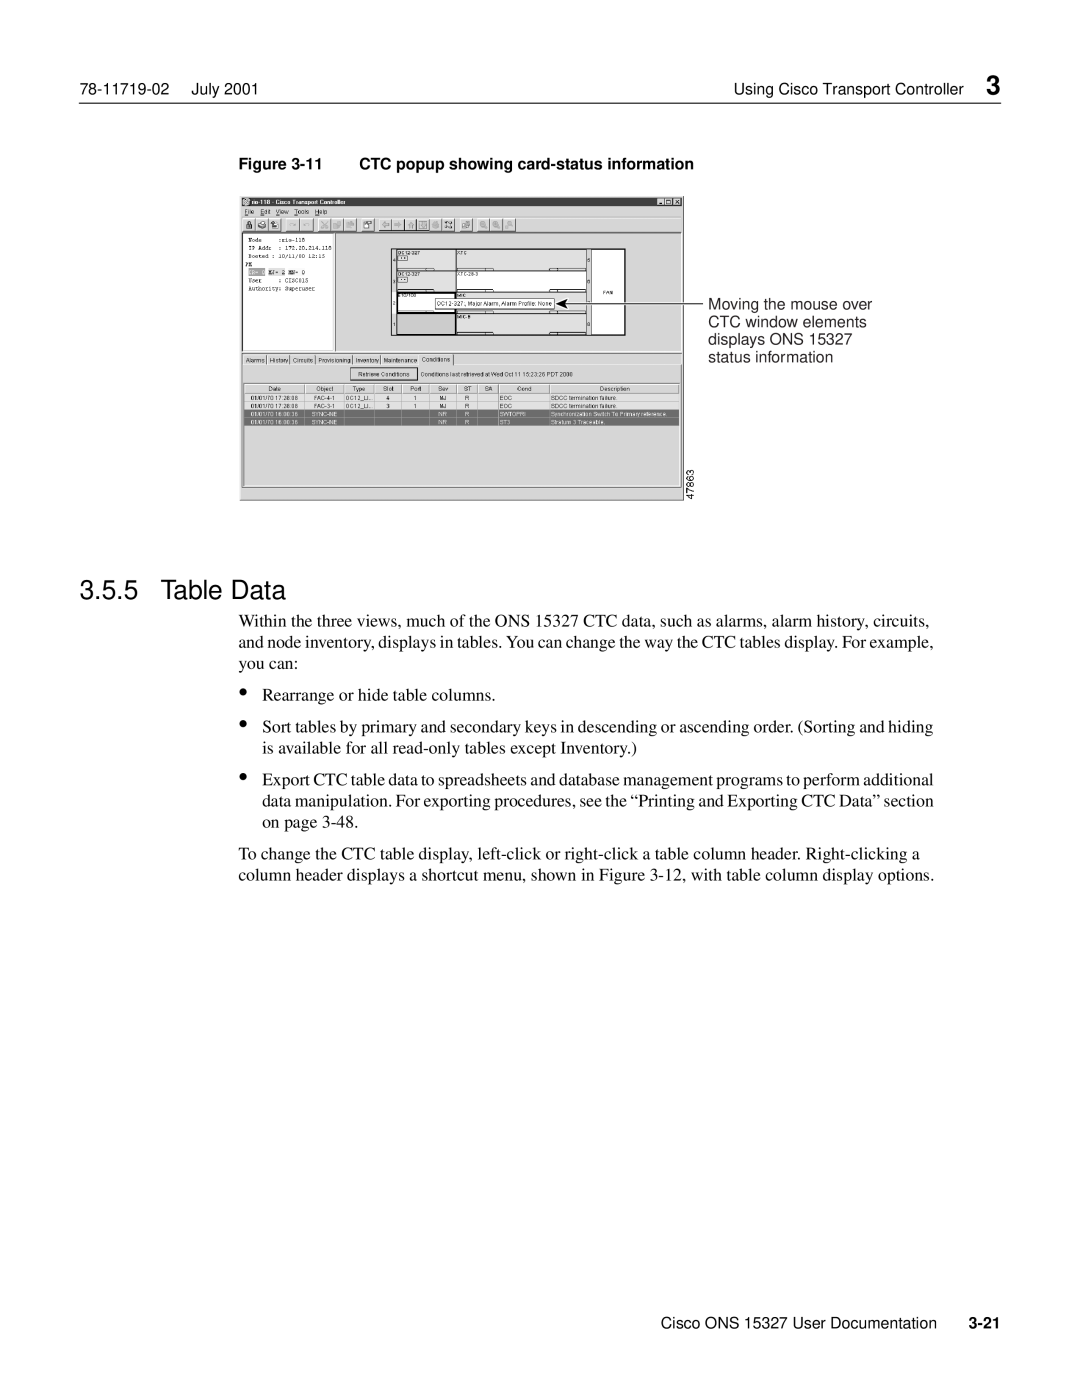 Cisco Systems ONS 15327 manual Table Data 